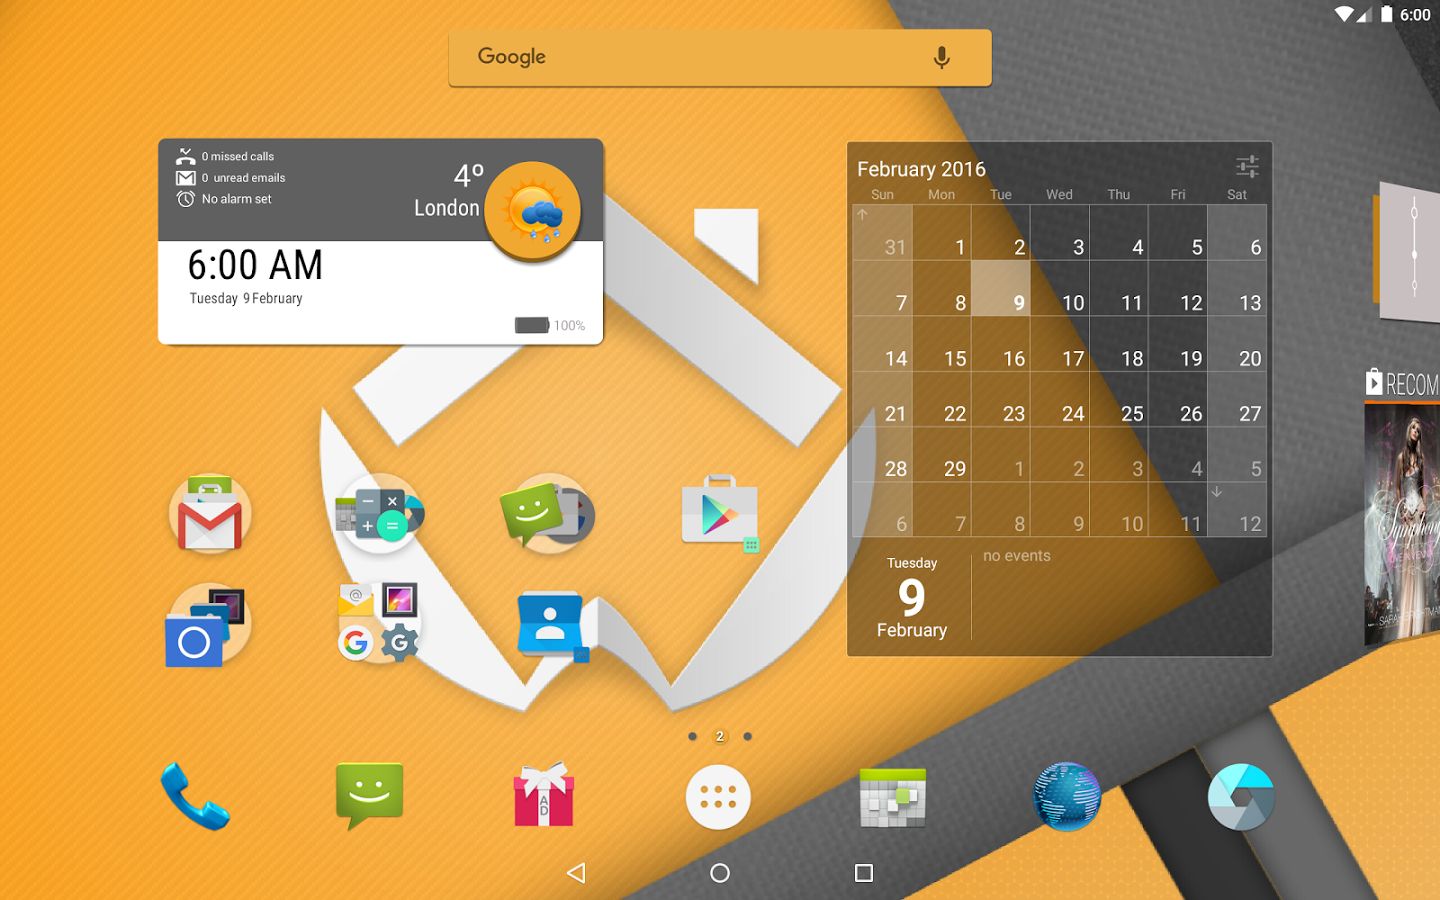 Adw Launcher 2 Officially Launches, Premium Version On Sale For $1.99